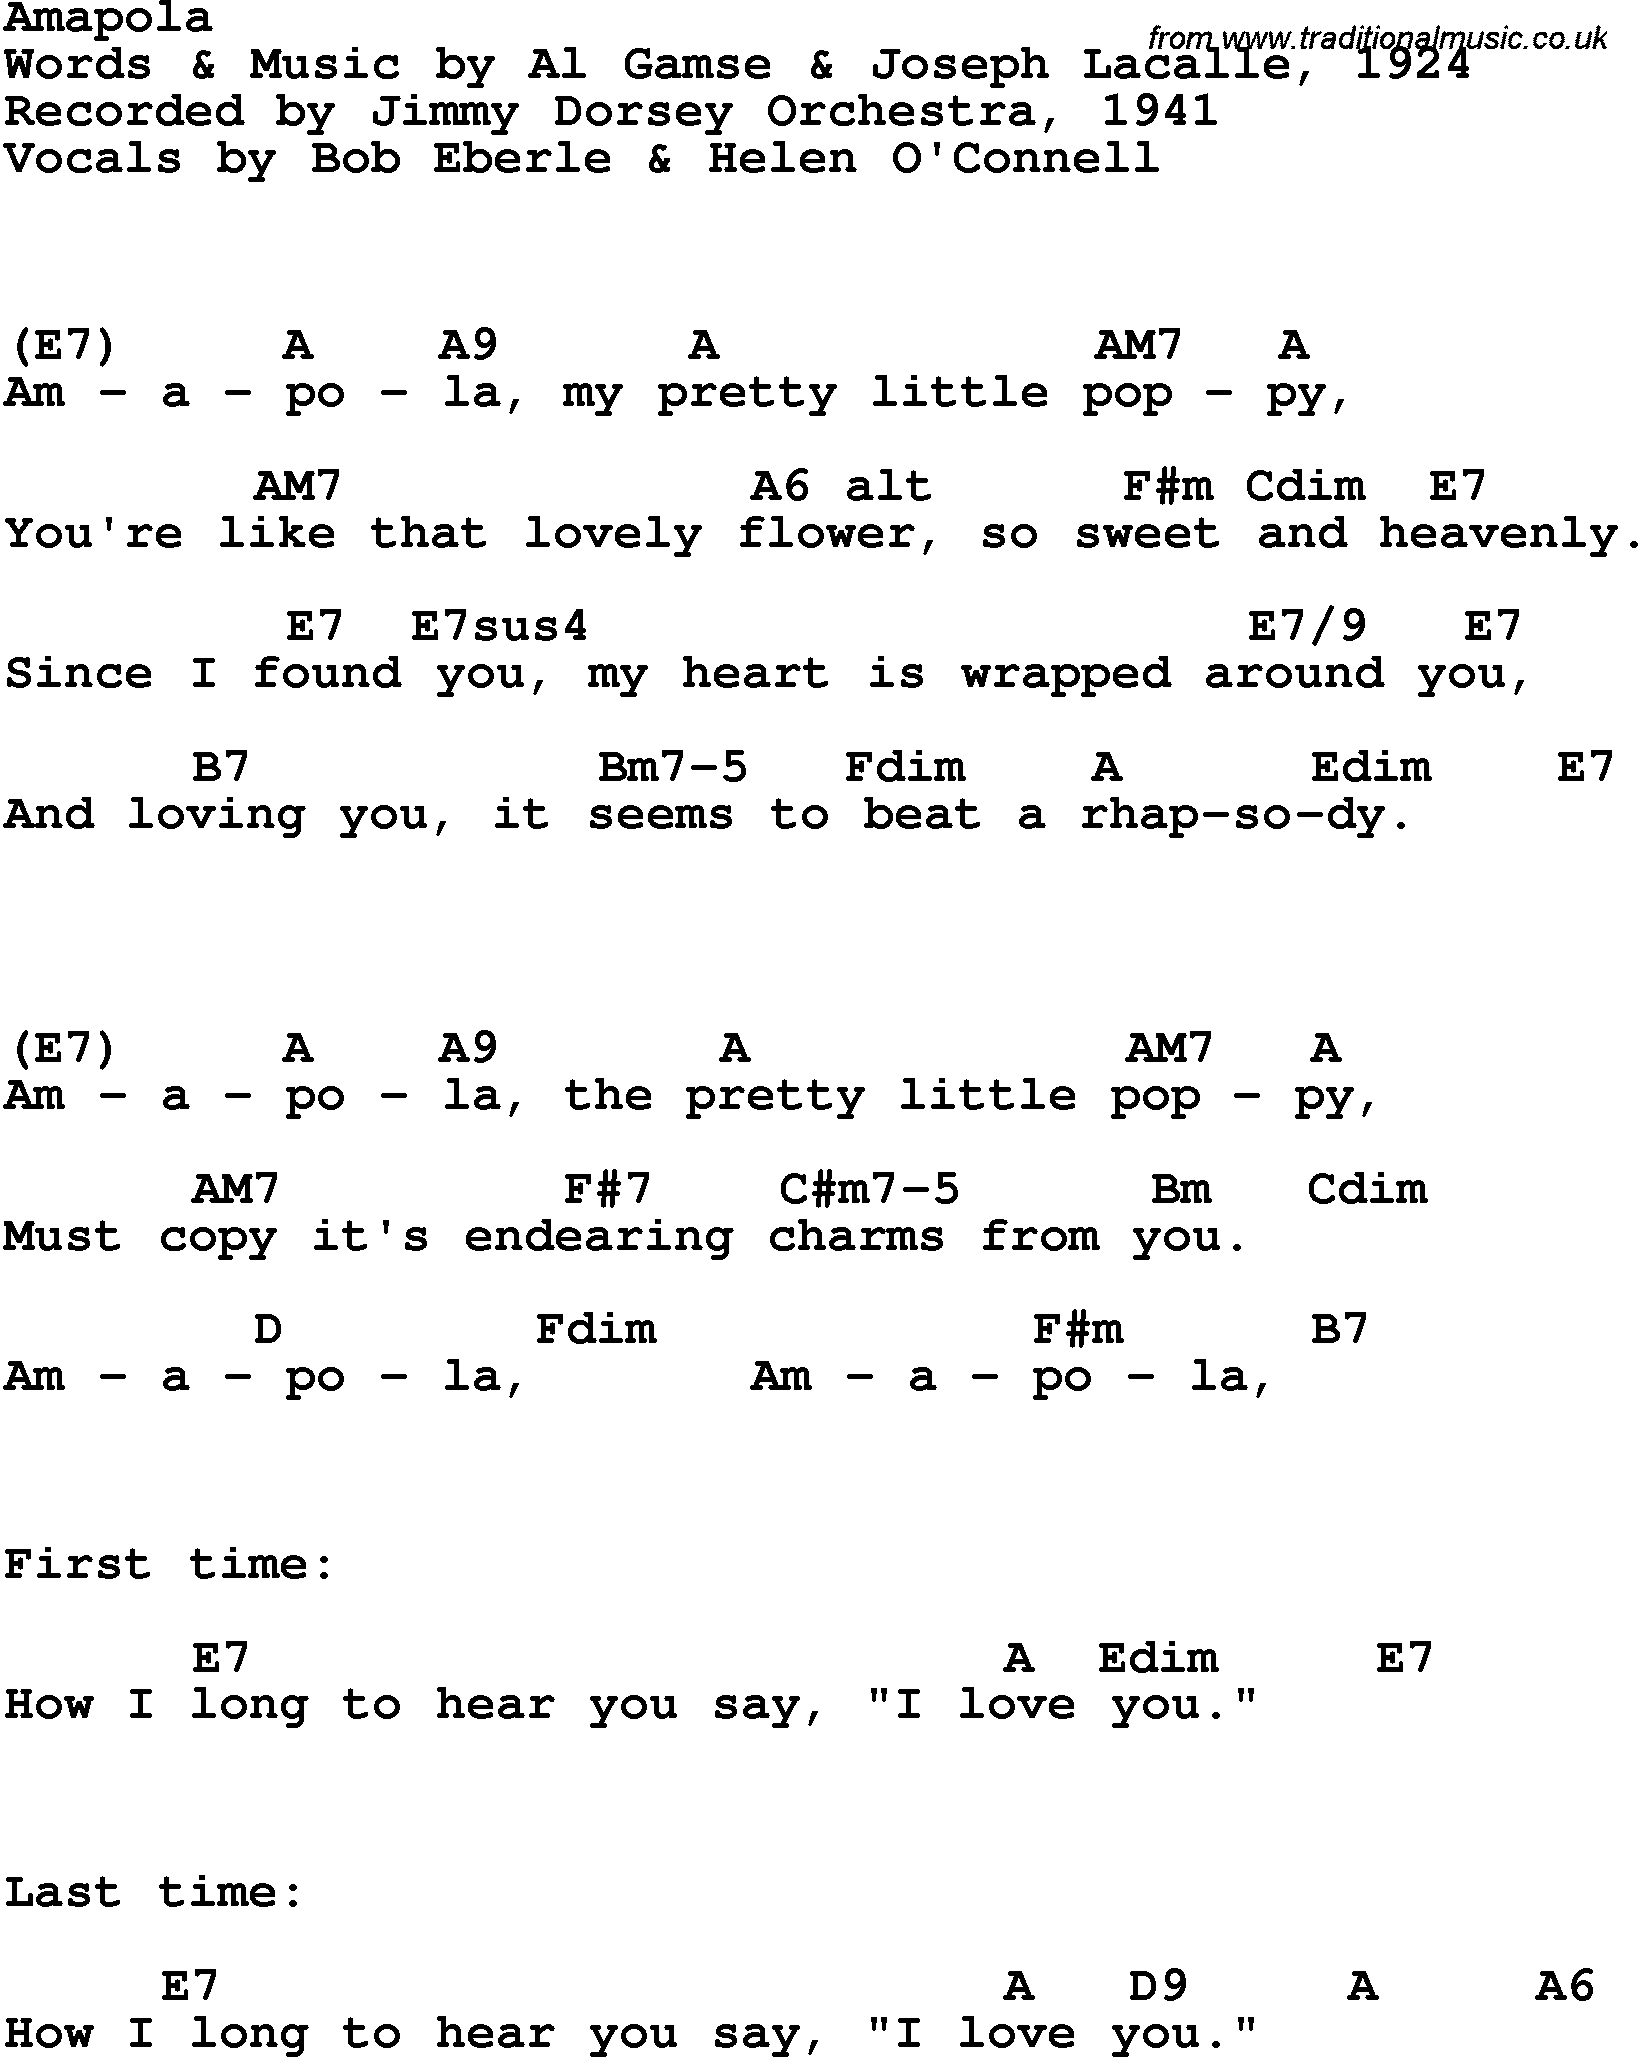 Song Lyrics with guitar chords for Amapola - Jimmy Dorsey, 1941